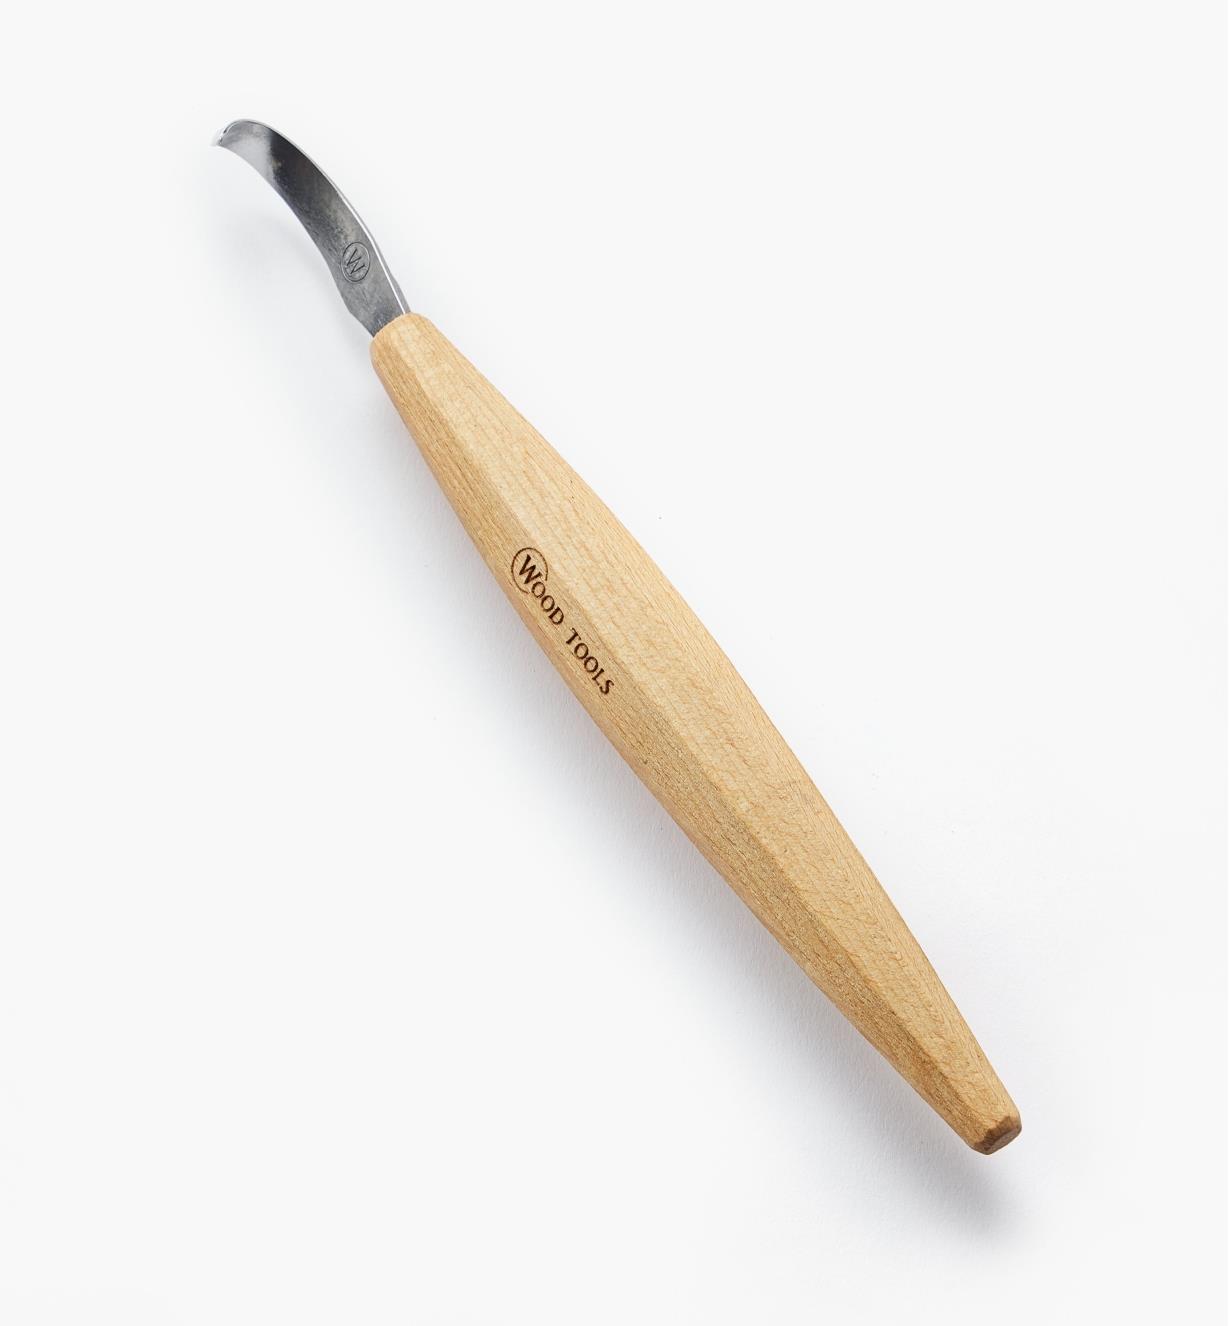 44D2010 - Right-Hand Compound-Curve Spoon Knife